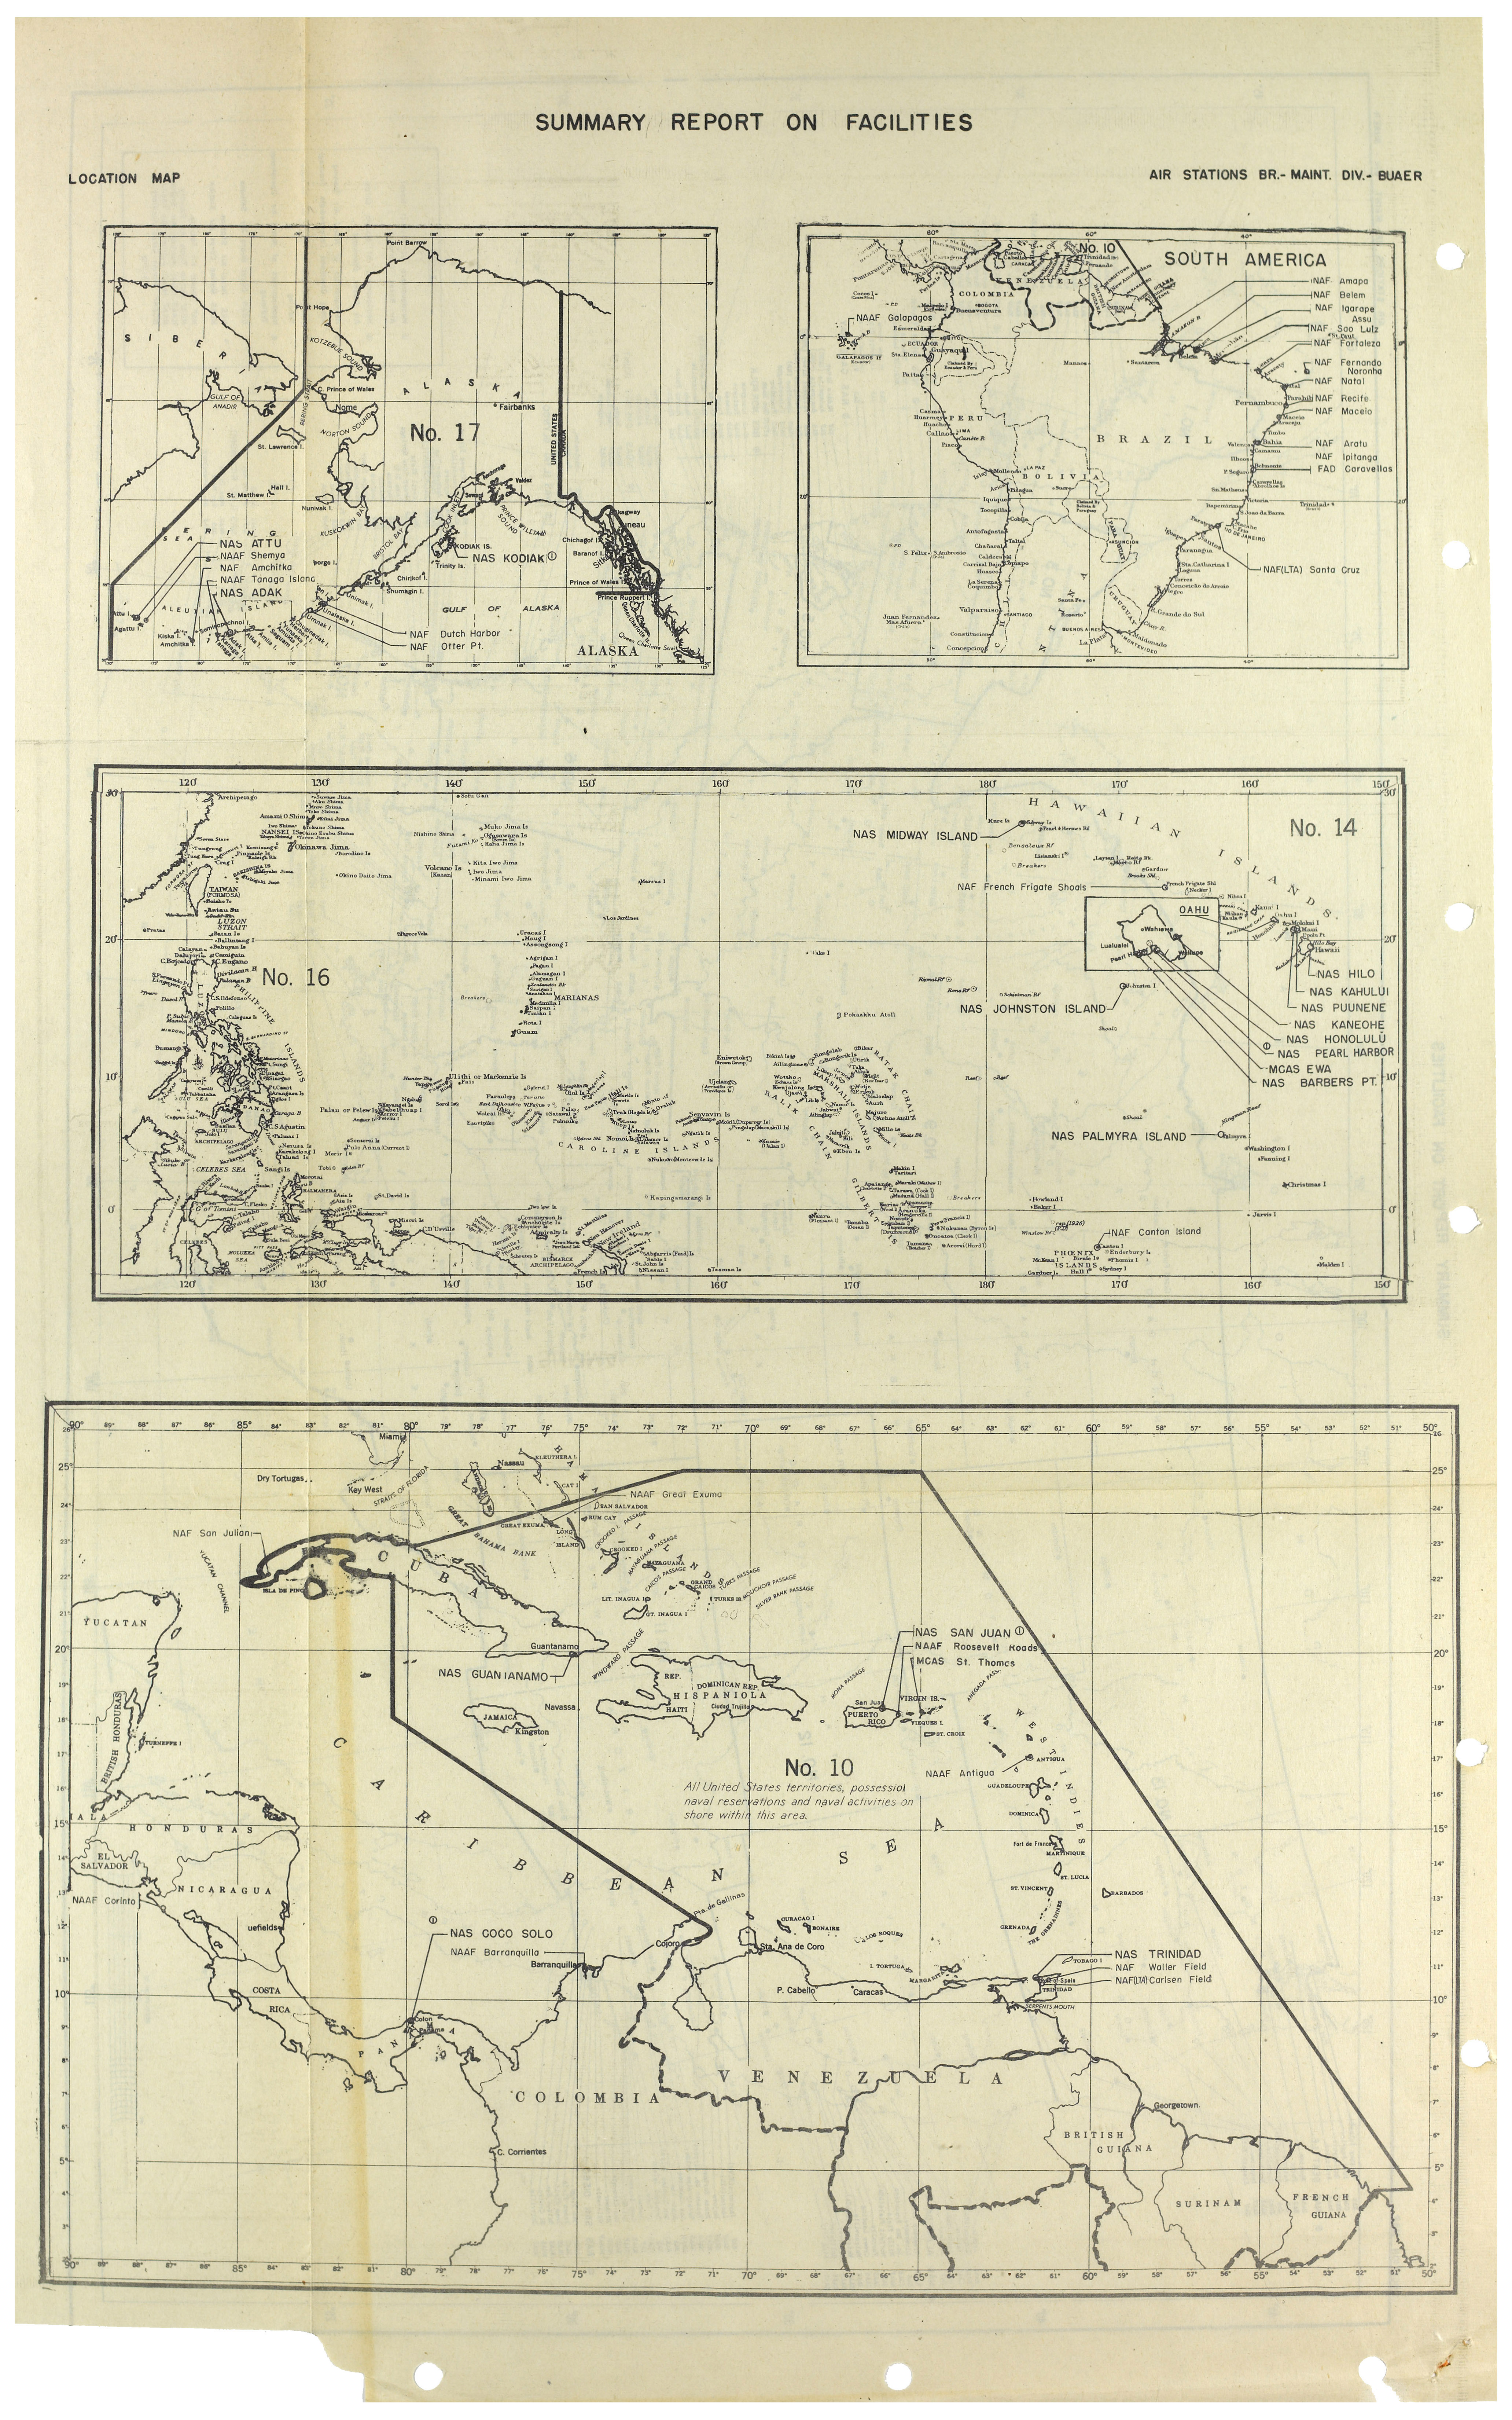 Naval Air Stations in the Americas and the Pacific